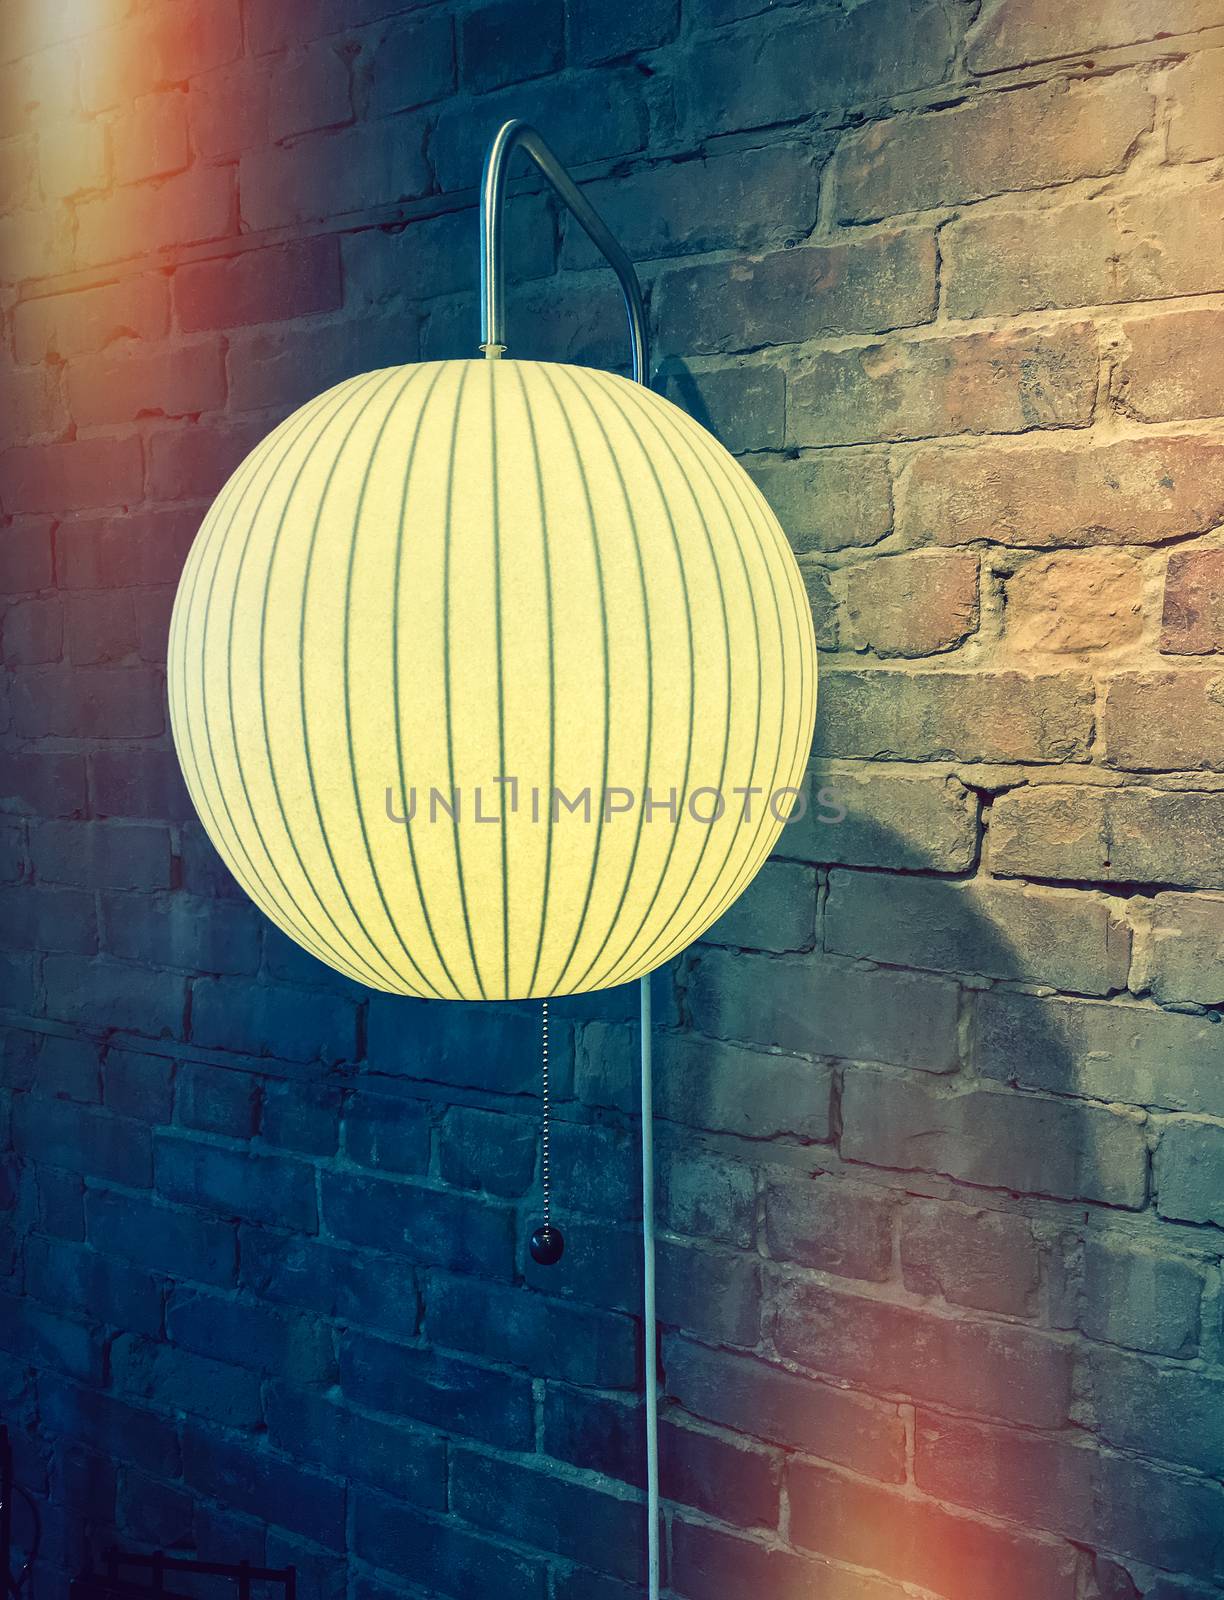 Lamp with round lampshade on brick wall. Retro style image with light leaks.